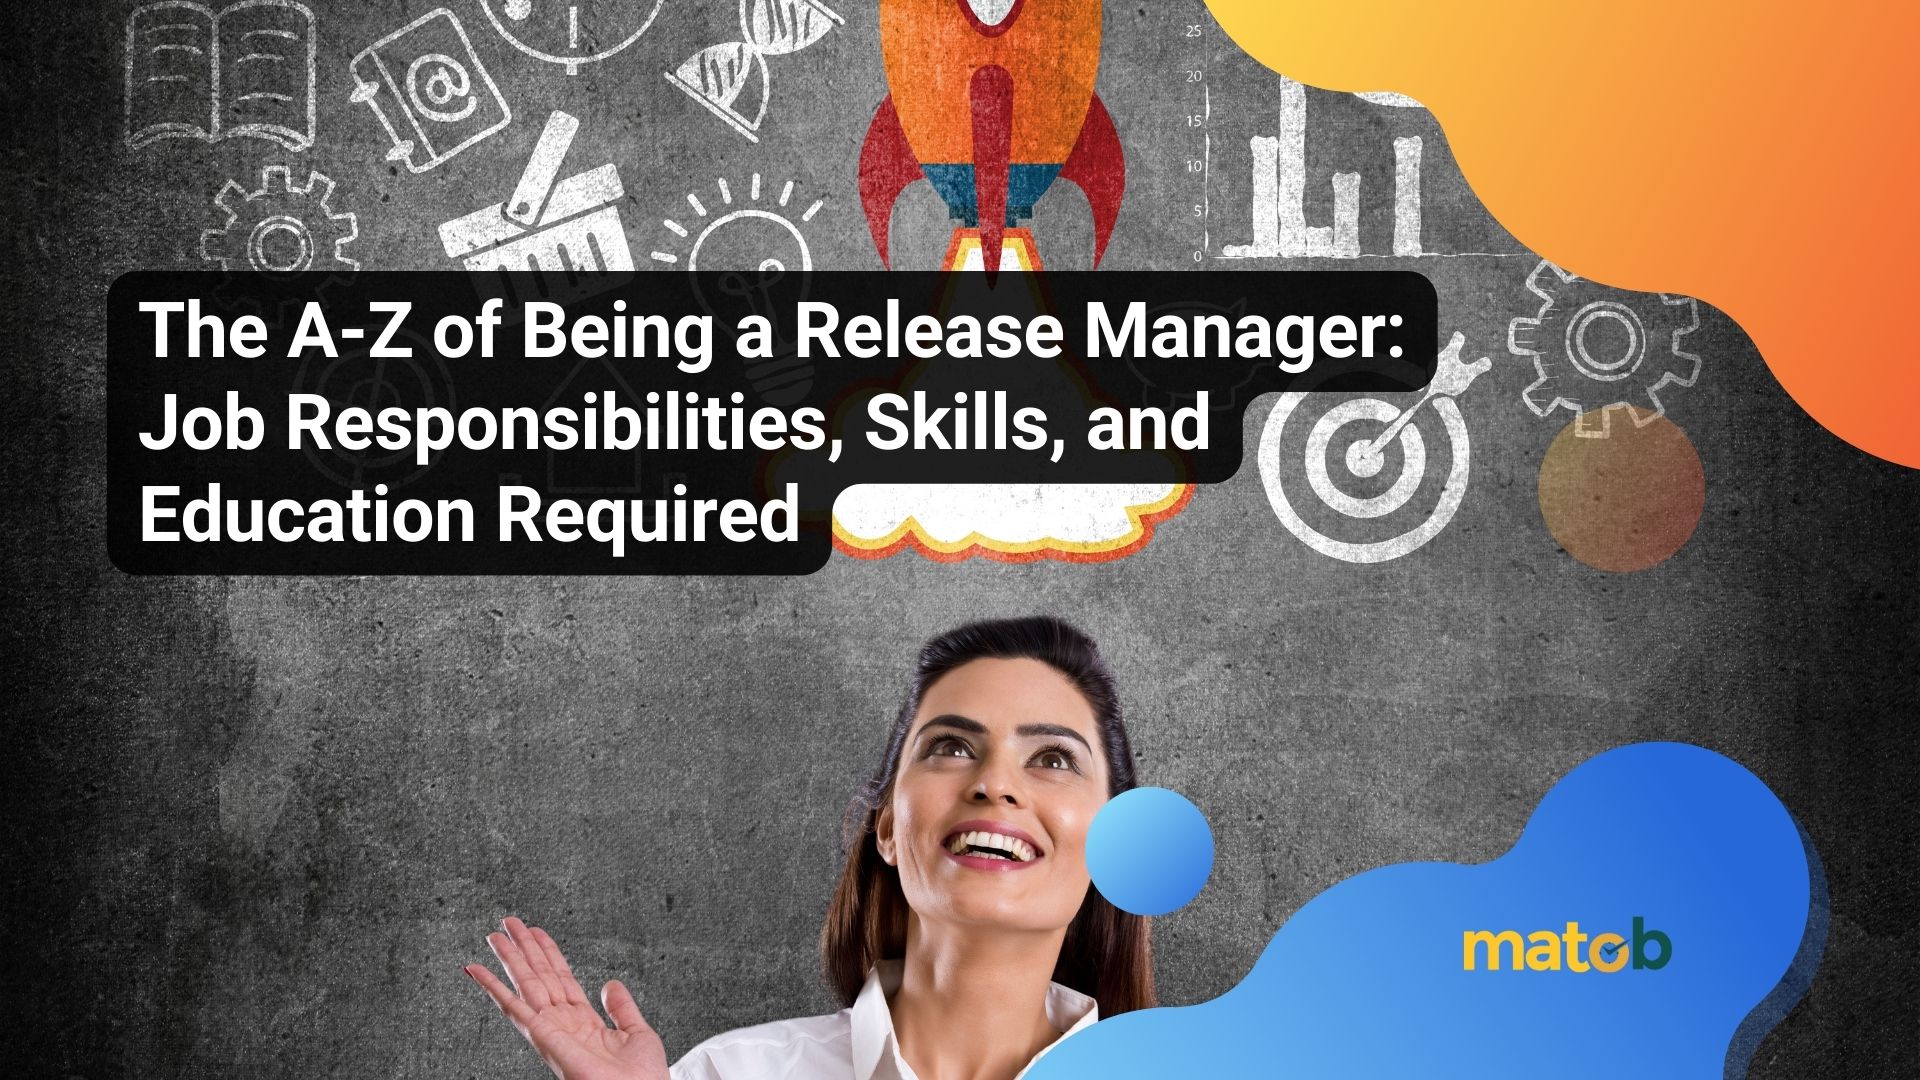 The A-Z of Being a Release Manager: Job Responsibilities, Skills, and Education Required